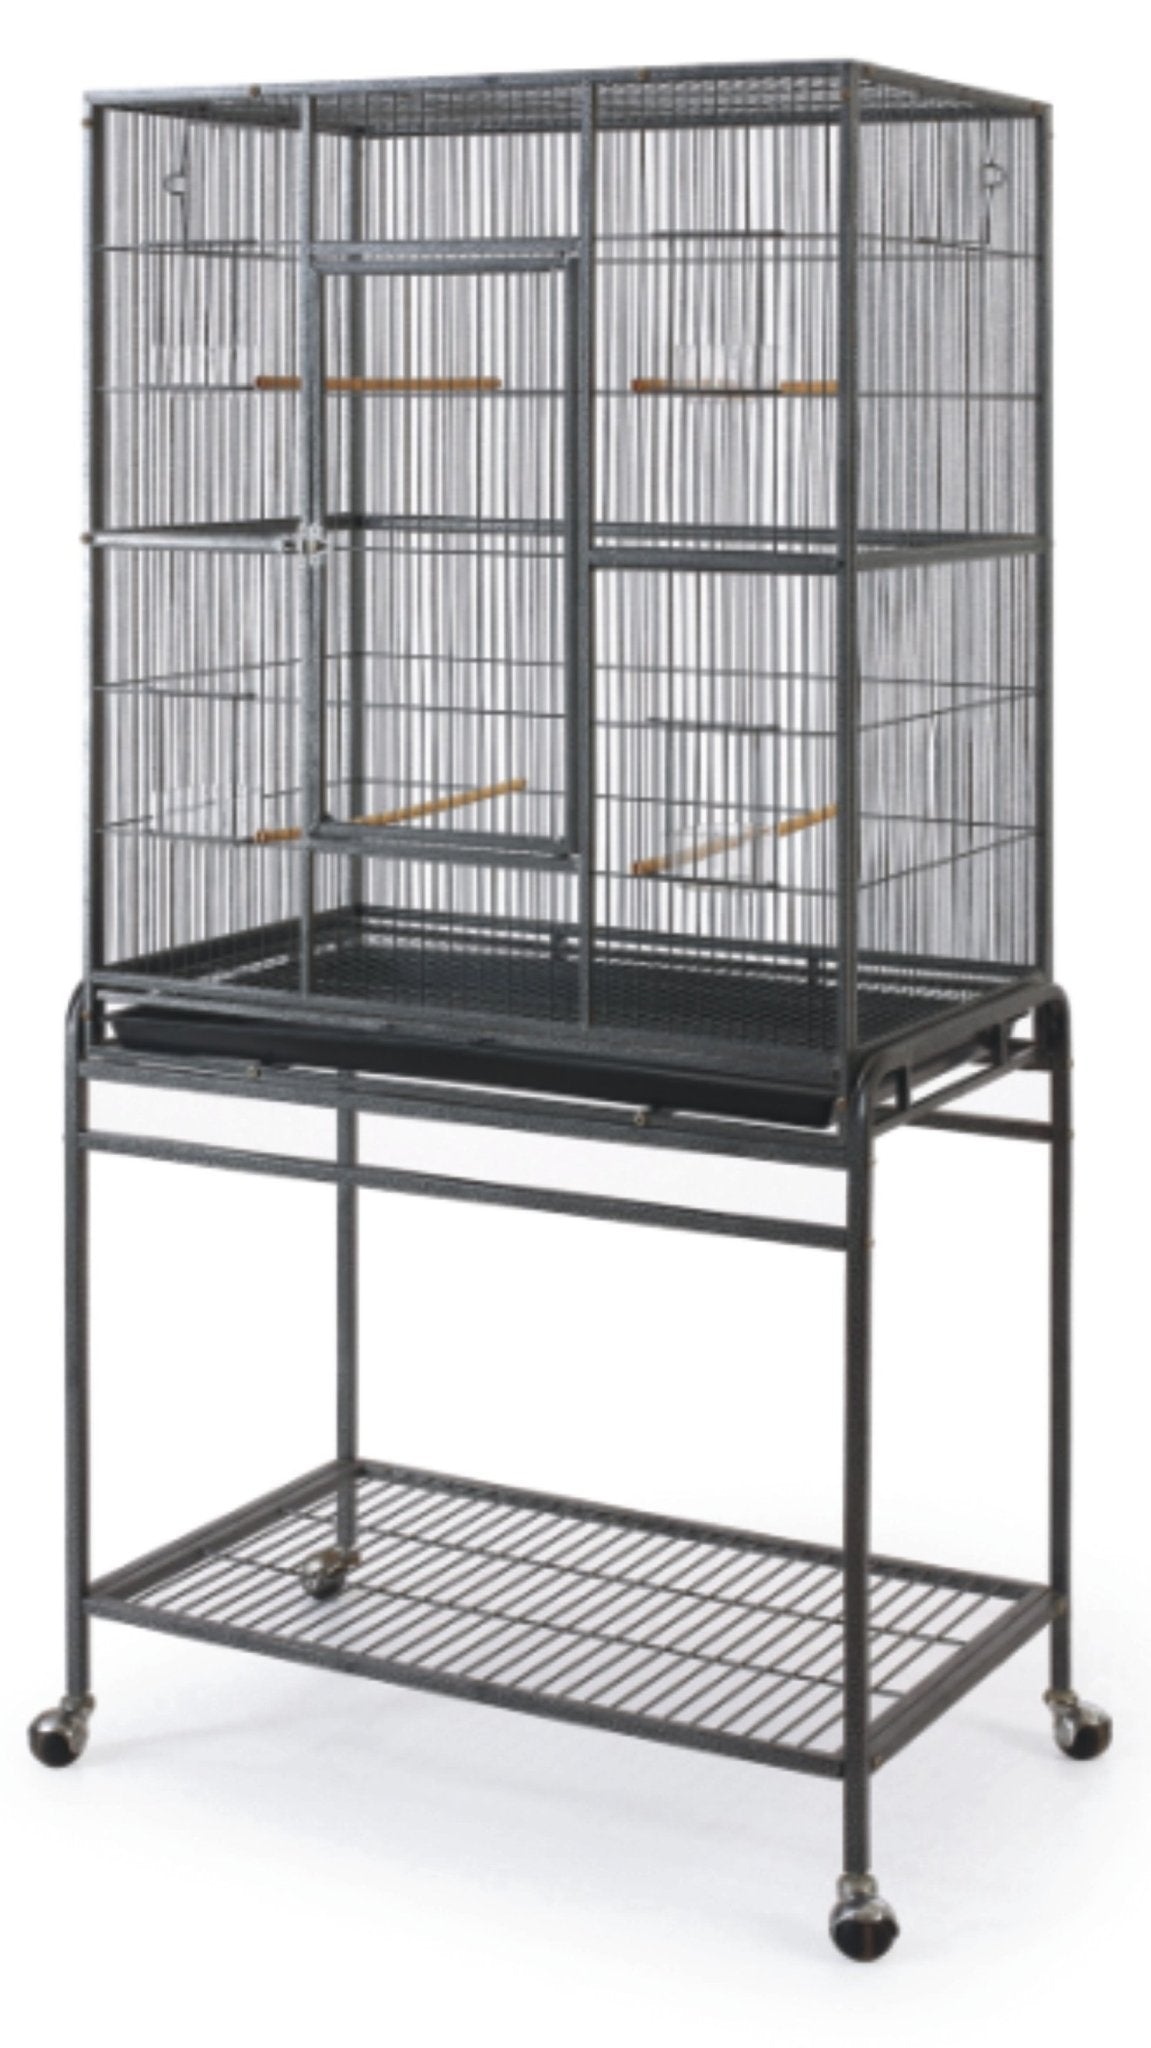 Bono Fido Deluxe Flight Cage with Stand 45432 24'' - Woonona Petfood & Produce